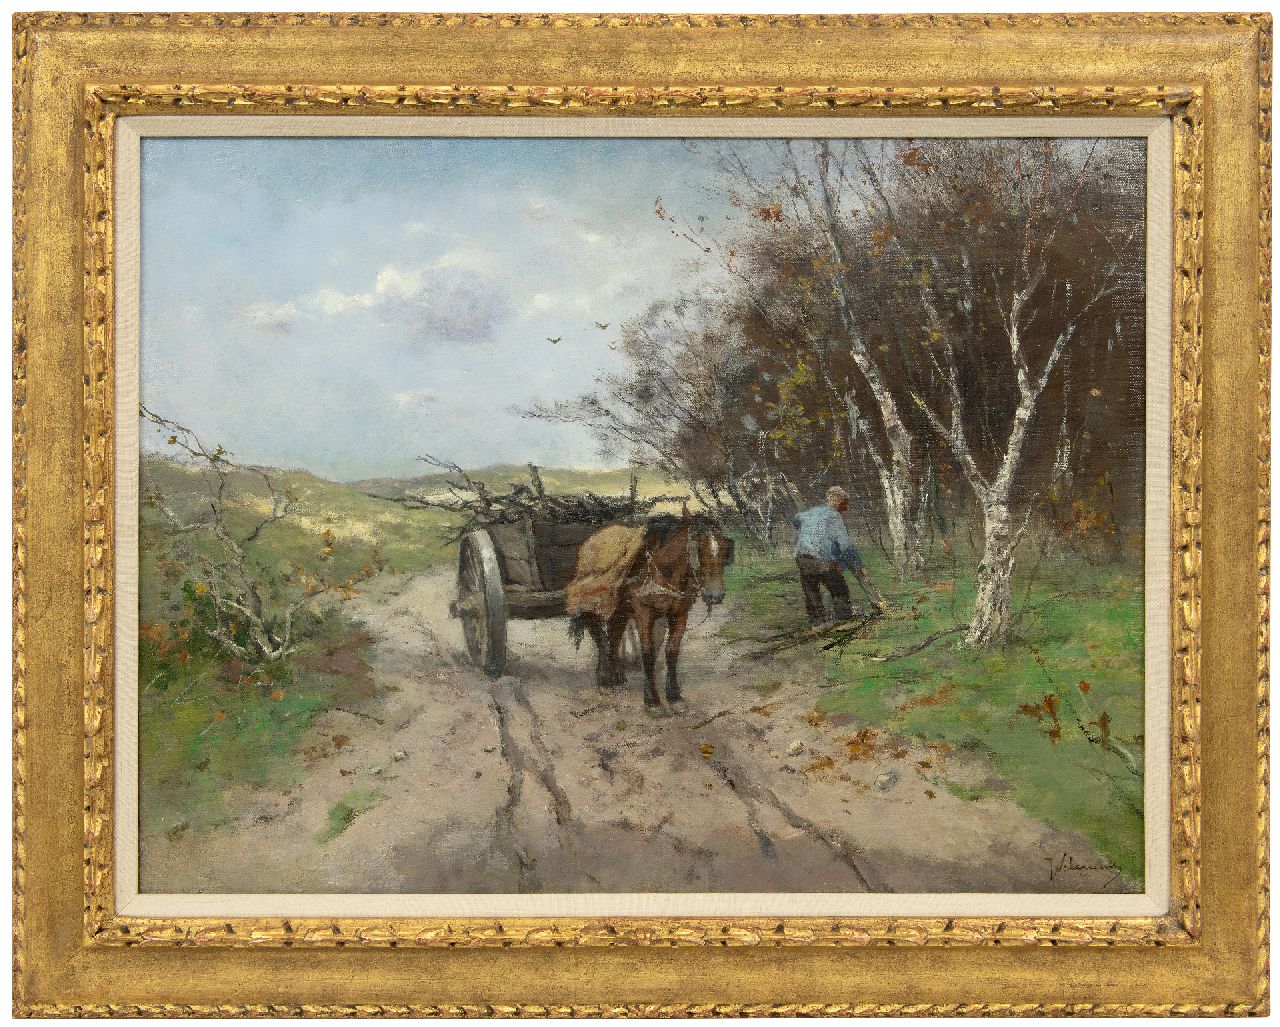 Scherrewitz J.F.C.  | Johan Frederik Cornelis Scherrewitz | Paintings offered for sale | Collecting wood with a horse cart in a dune landscape, oil on canvas 50.0 x 65.5 cm, signed l.r. and zonder lijst